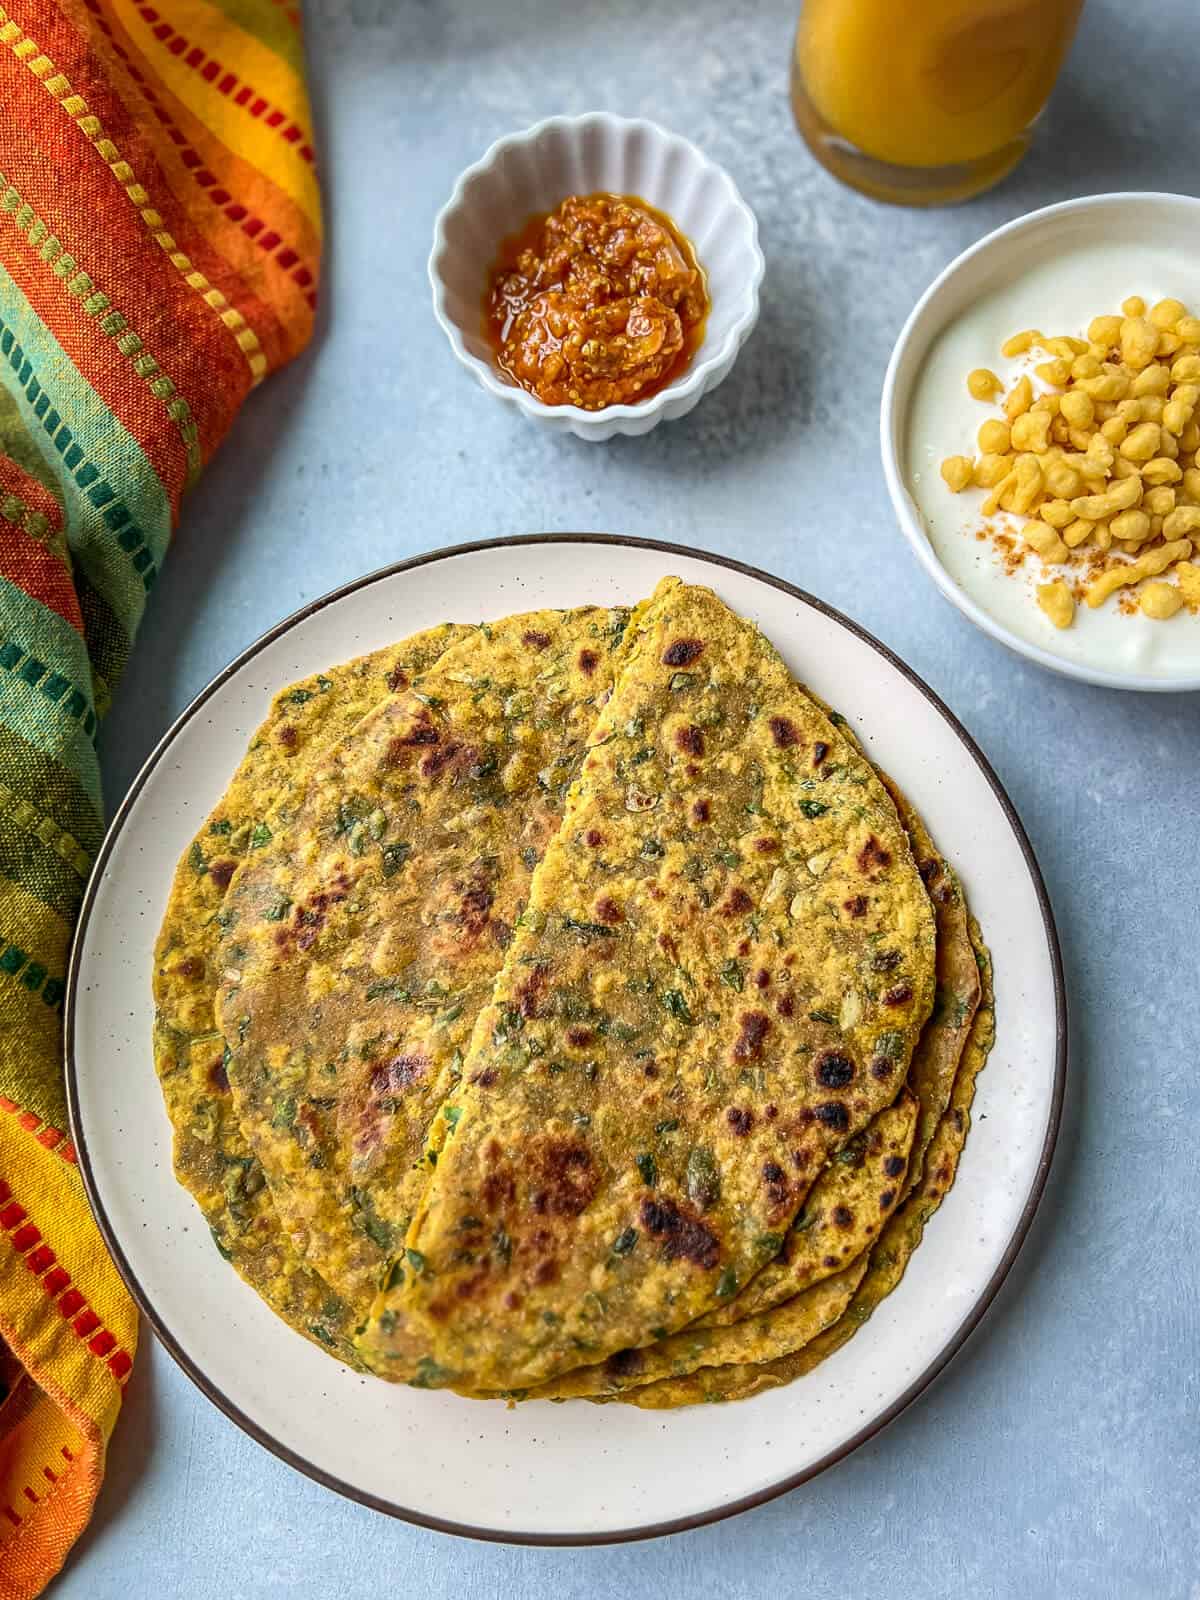 A stack of paratha on a plate, with bowls of raita and pickle on the side.